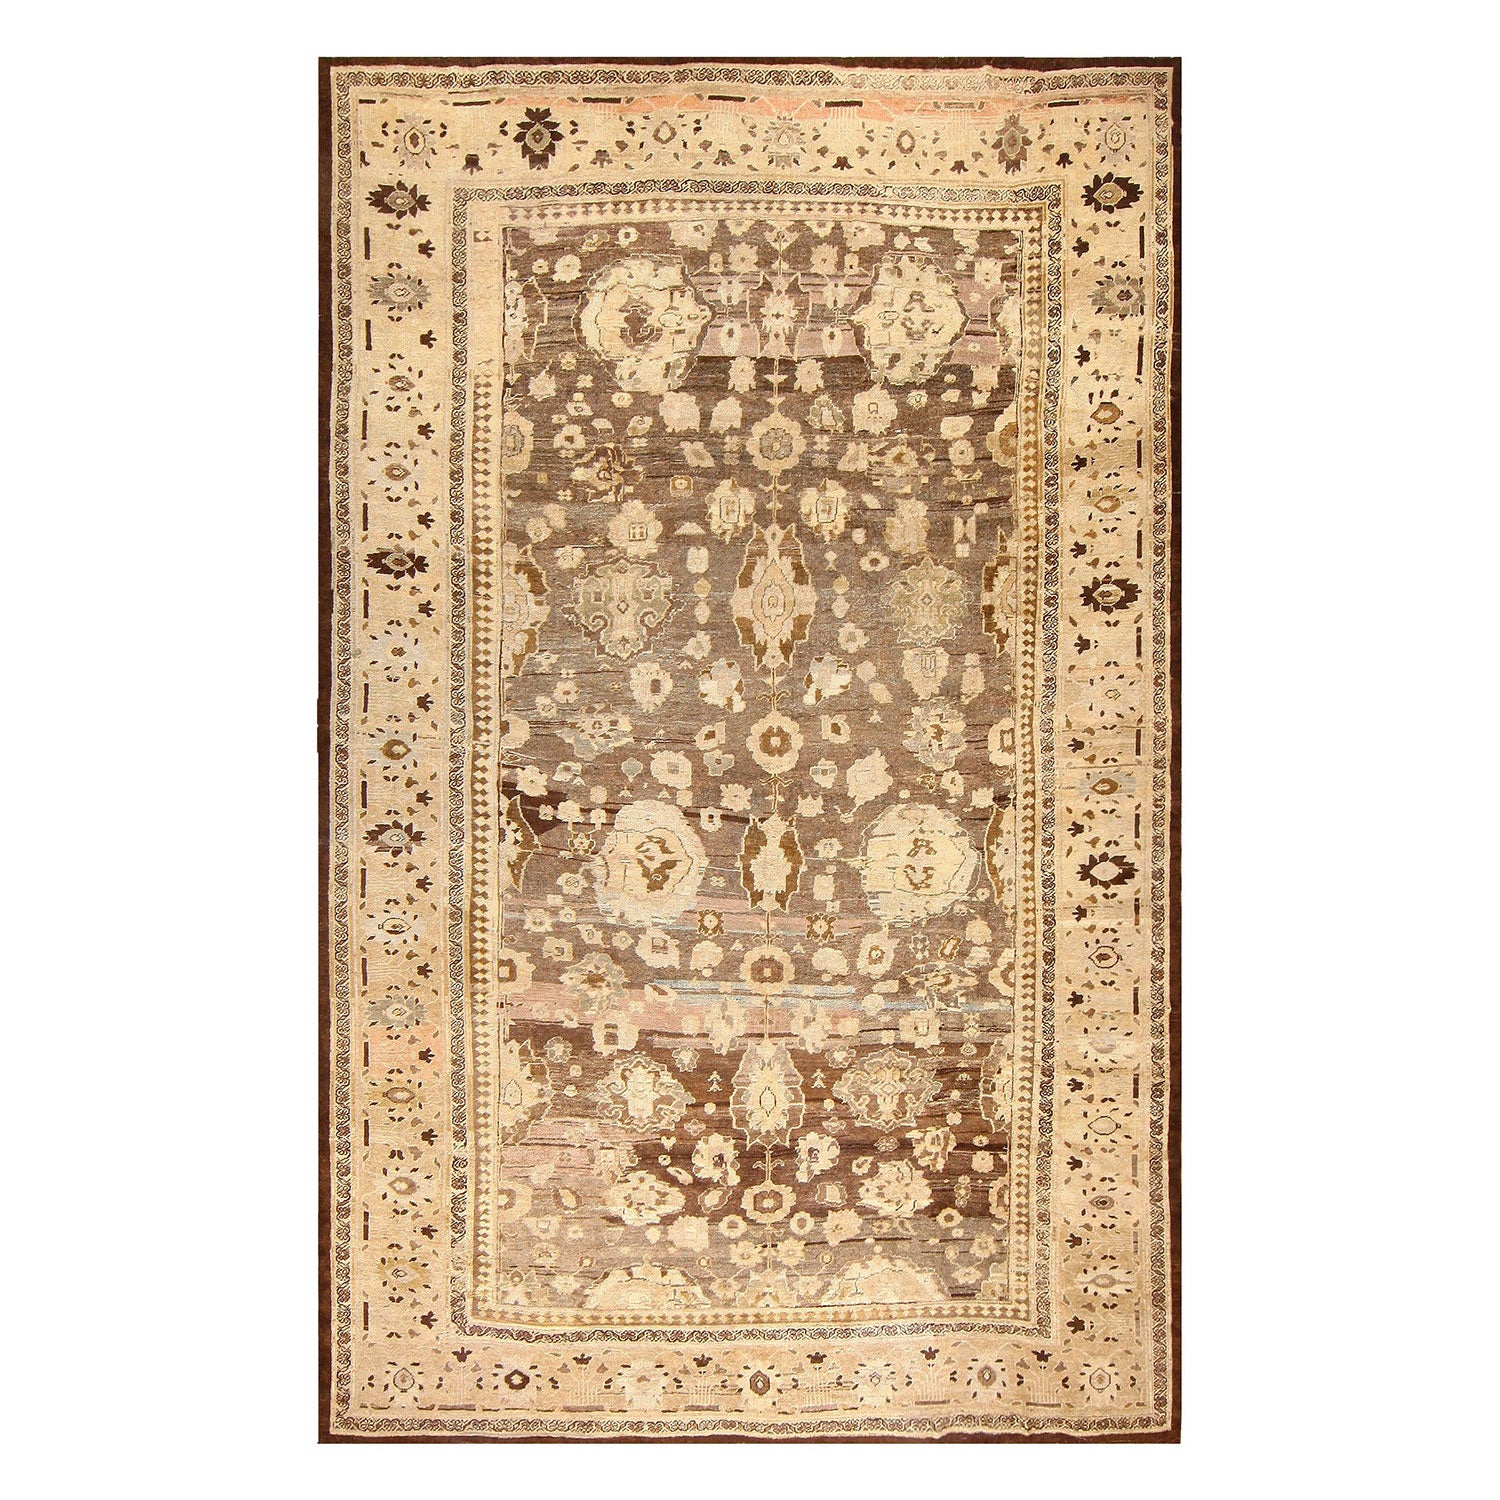 Antique Persian Sultanabad Rug - 10'9" x 16'7" Default Title